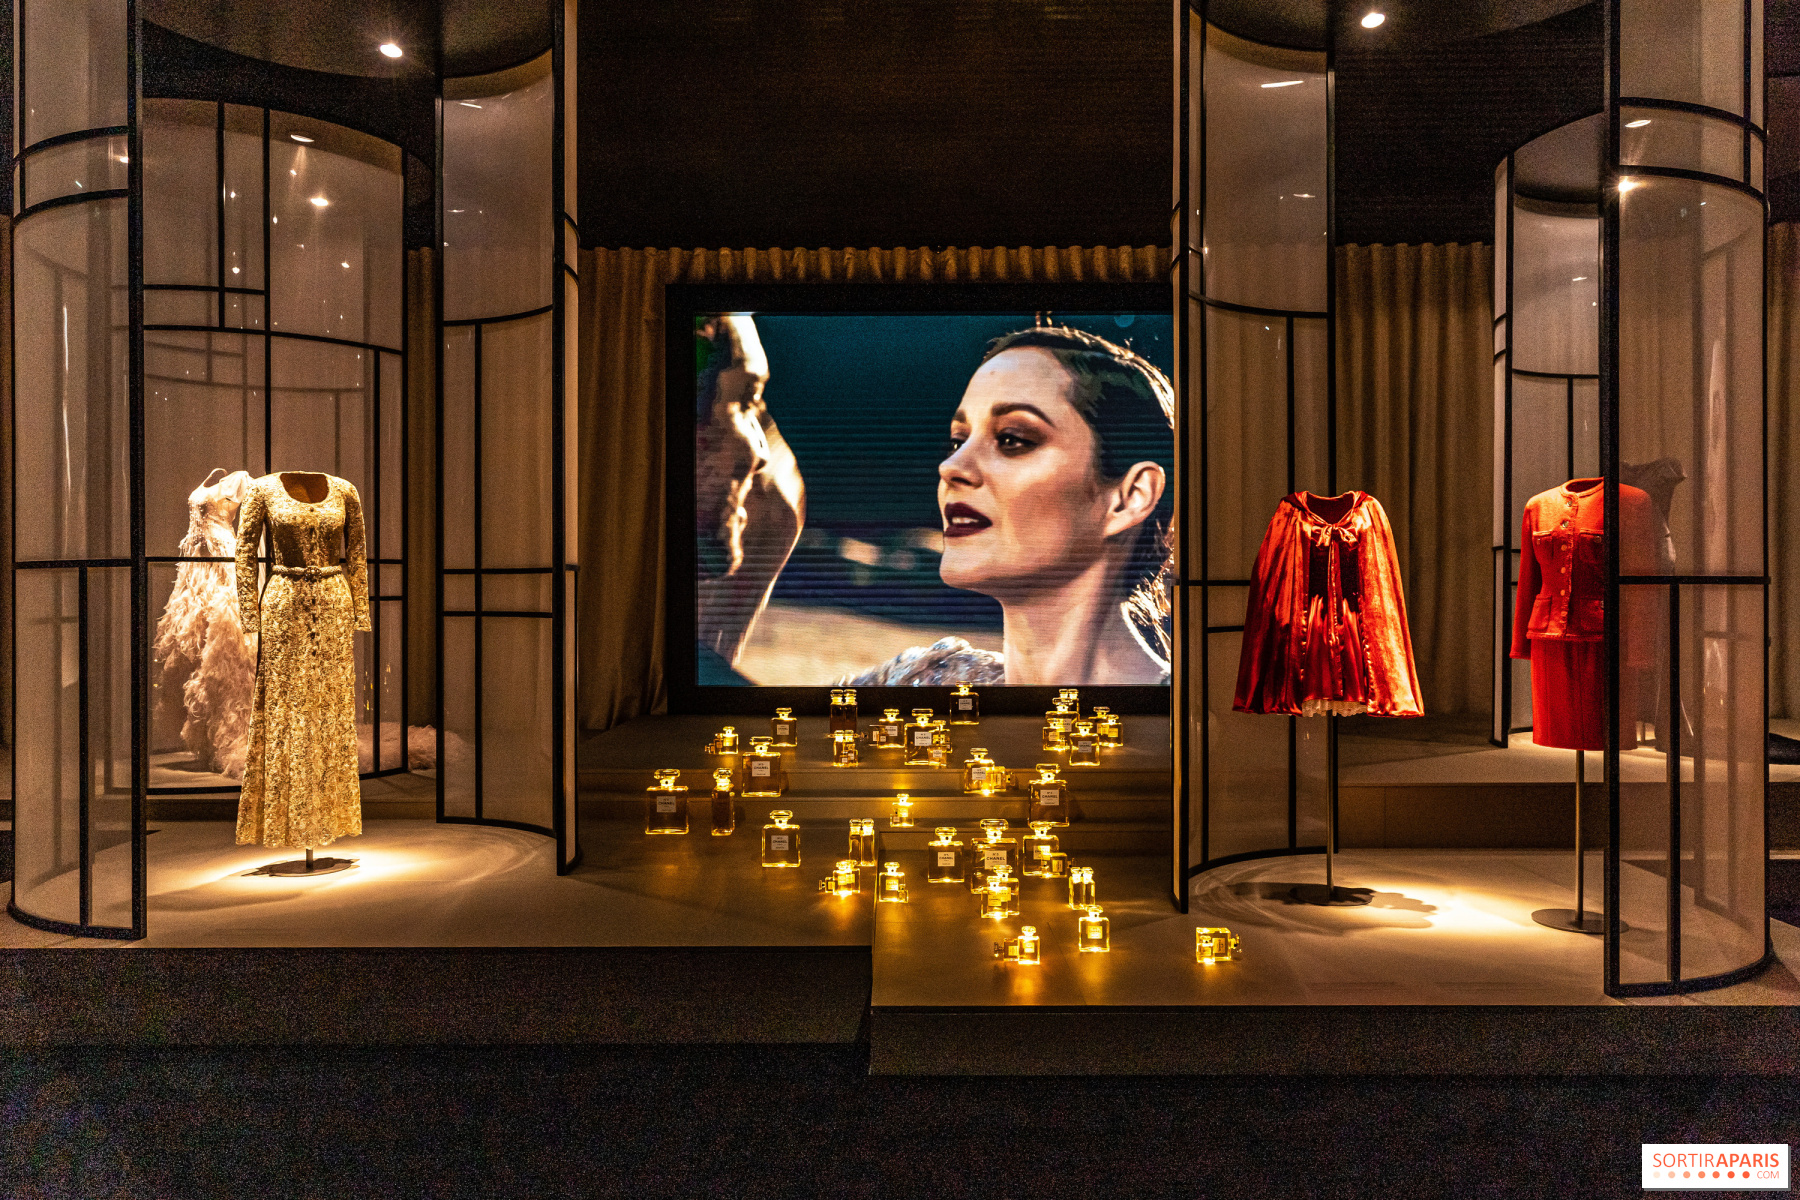 Le Grand Numéro de Chanel: the free and immersive exhibition at